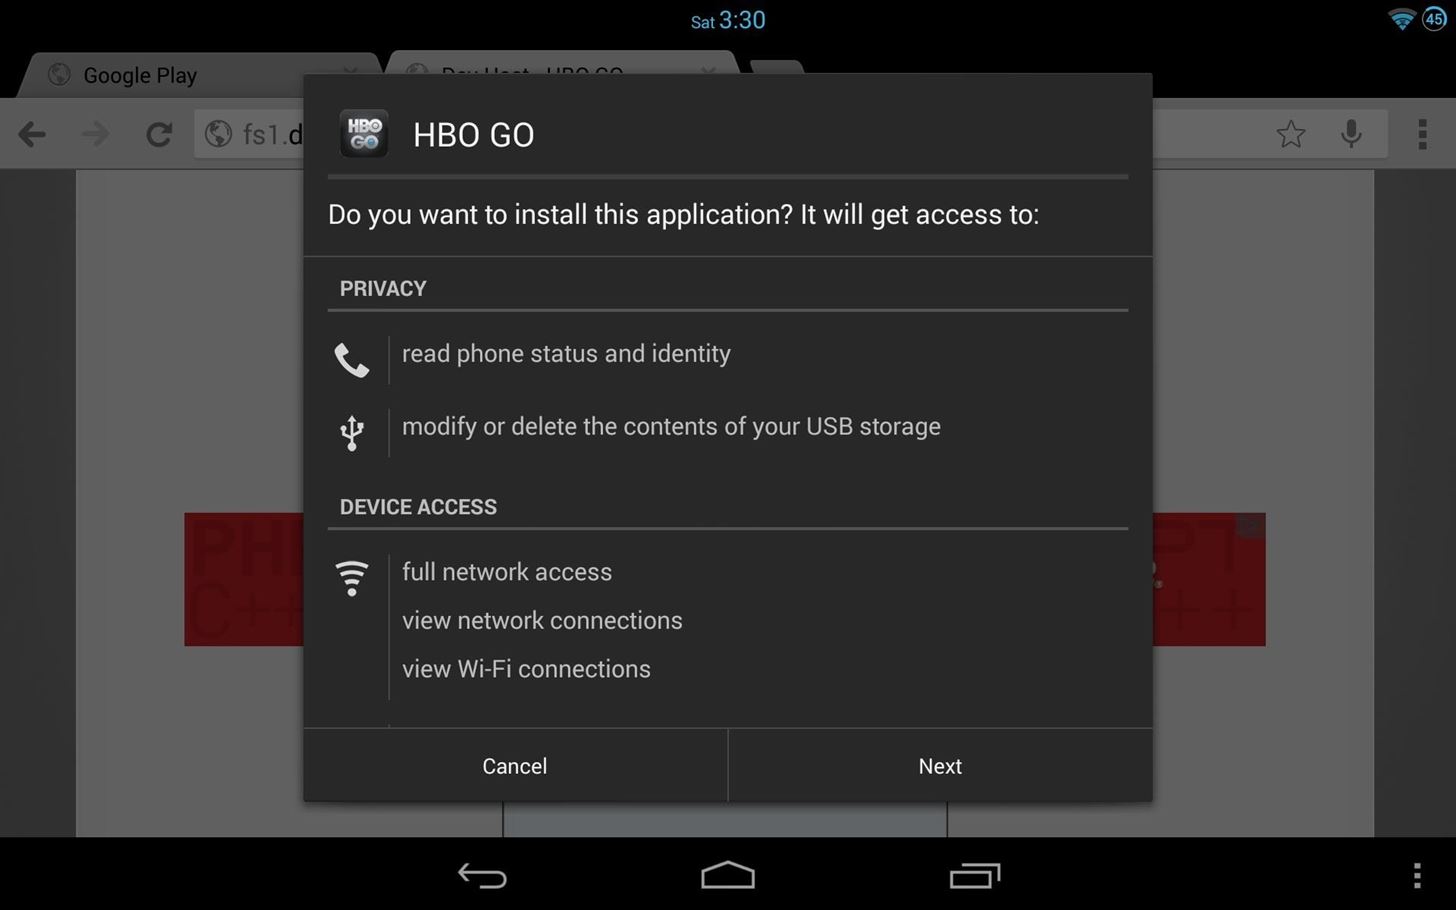 How to Install the HBO GO App on Your Nexus 7 Tablet (No Root Required)